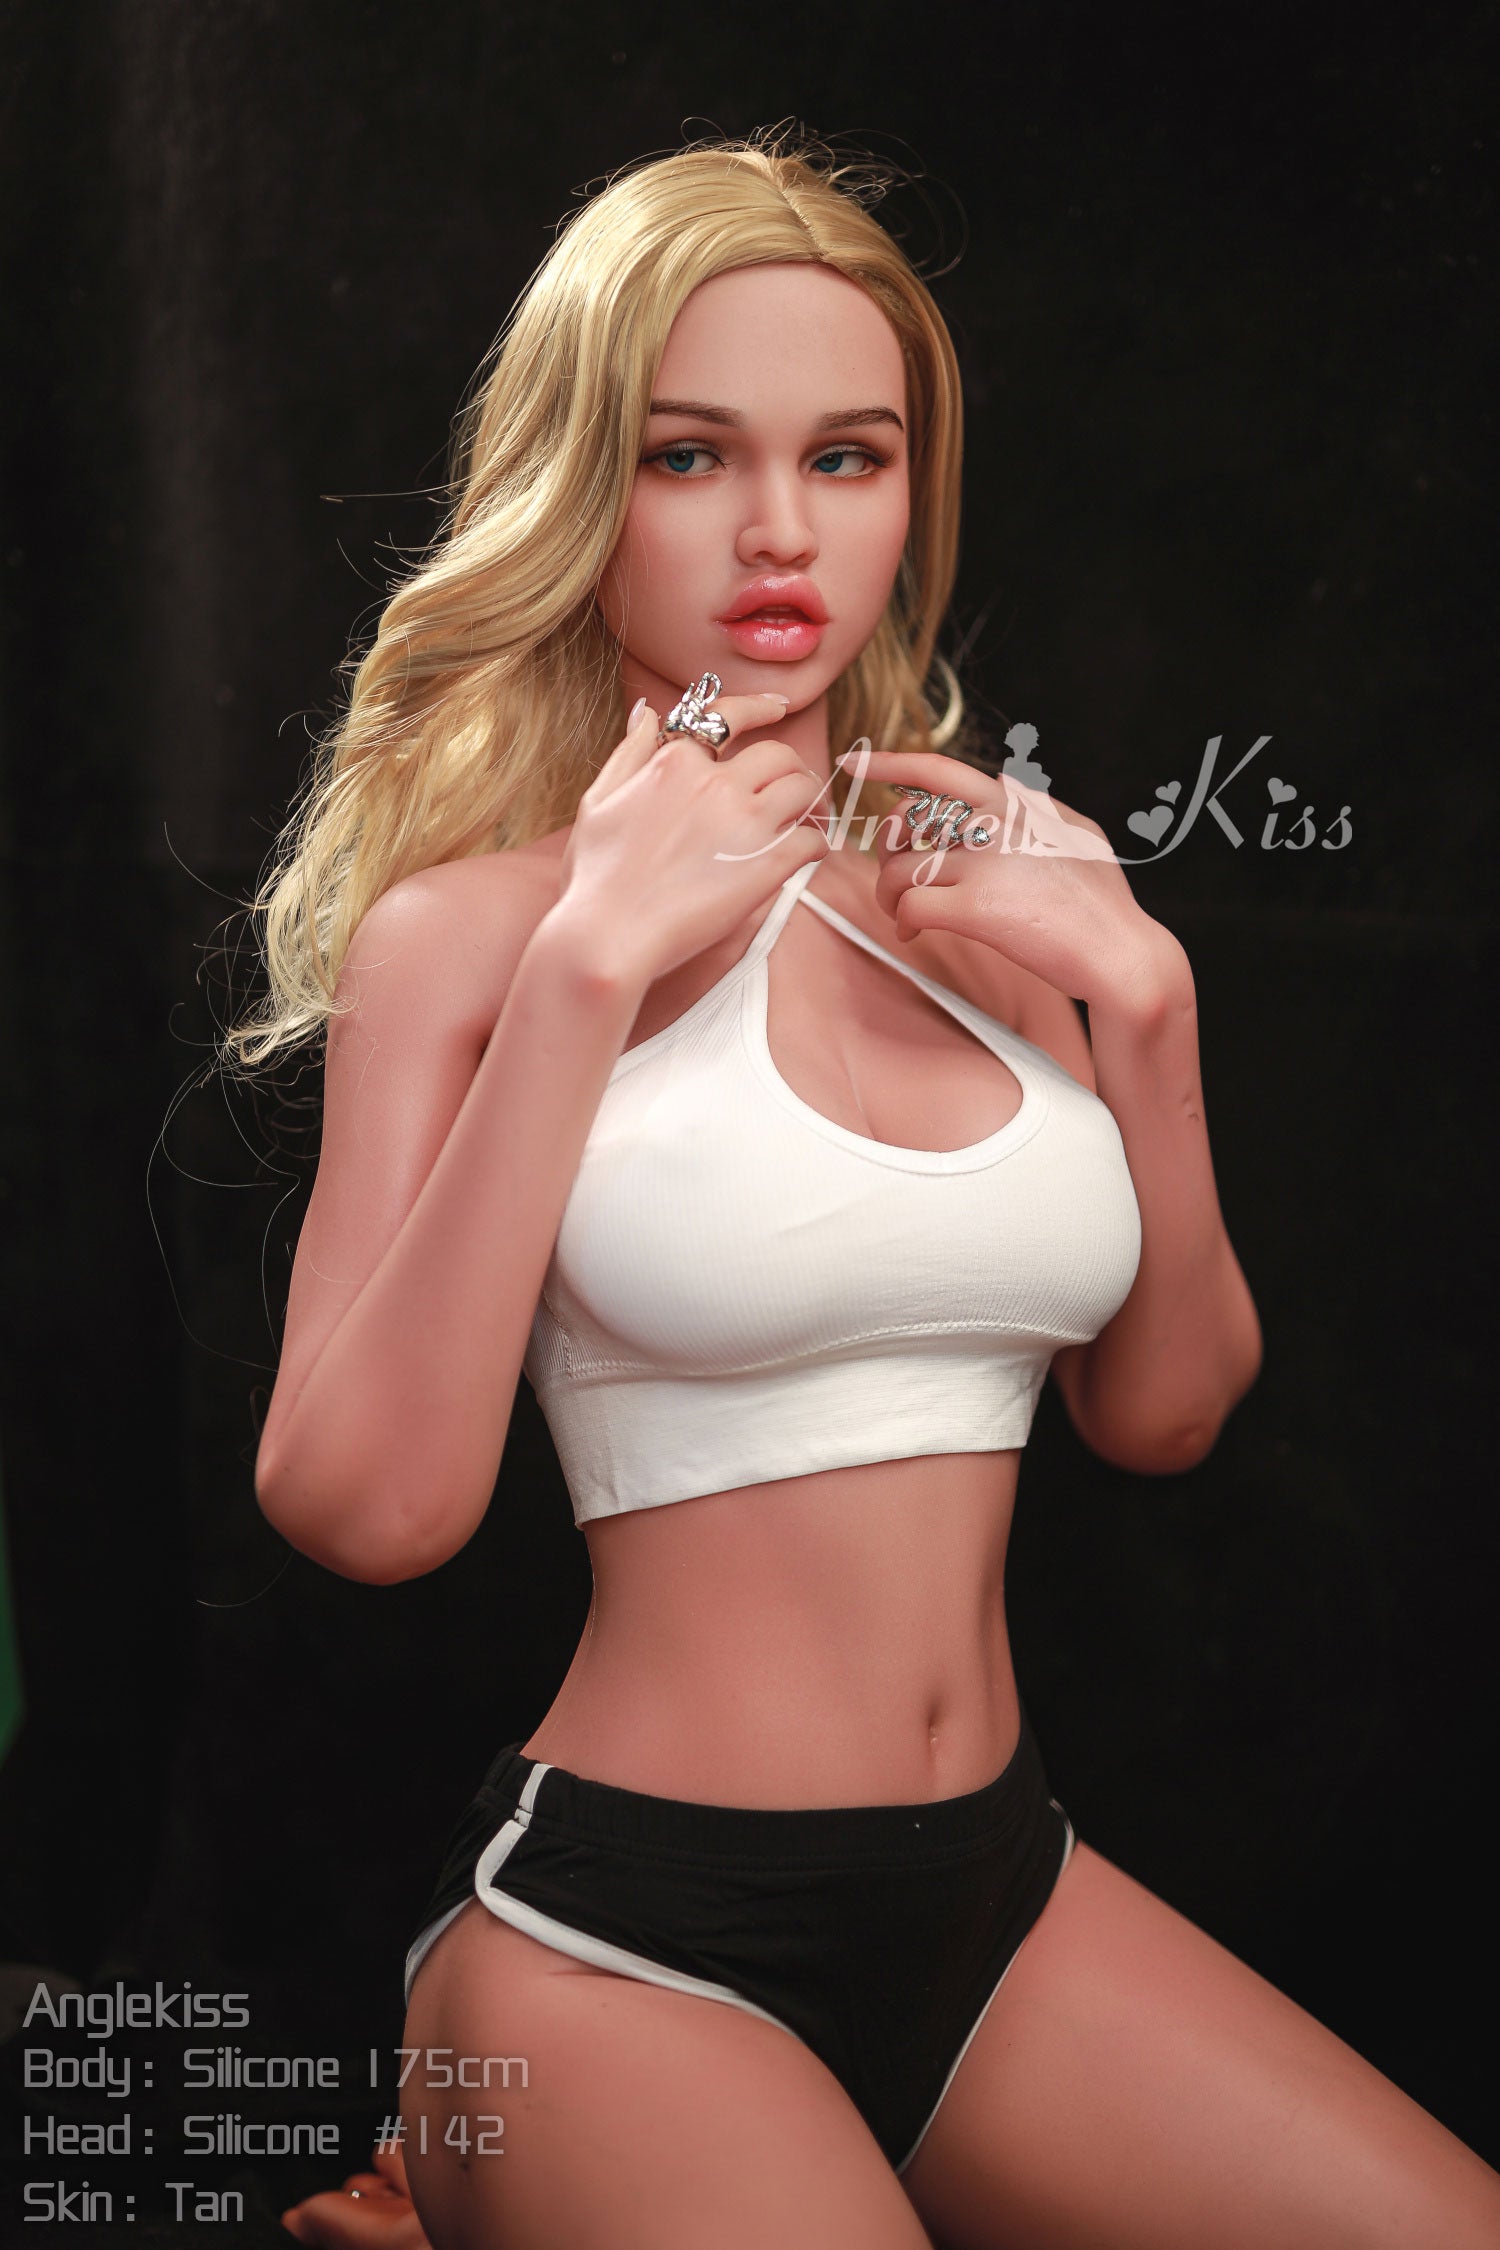 Angelkiss Doll 175 cm Silicone - Hana | Buy Sex Dolls at DOLLS ACTUALLY